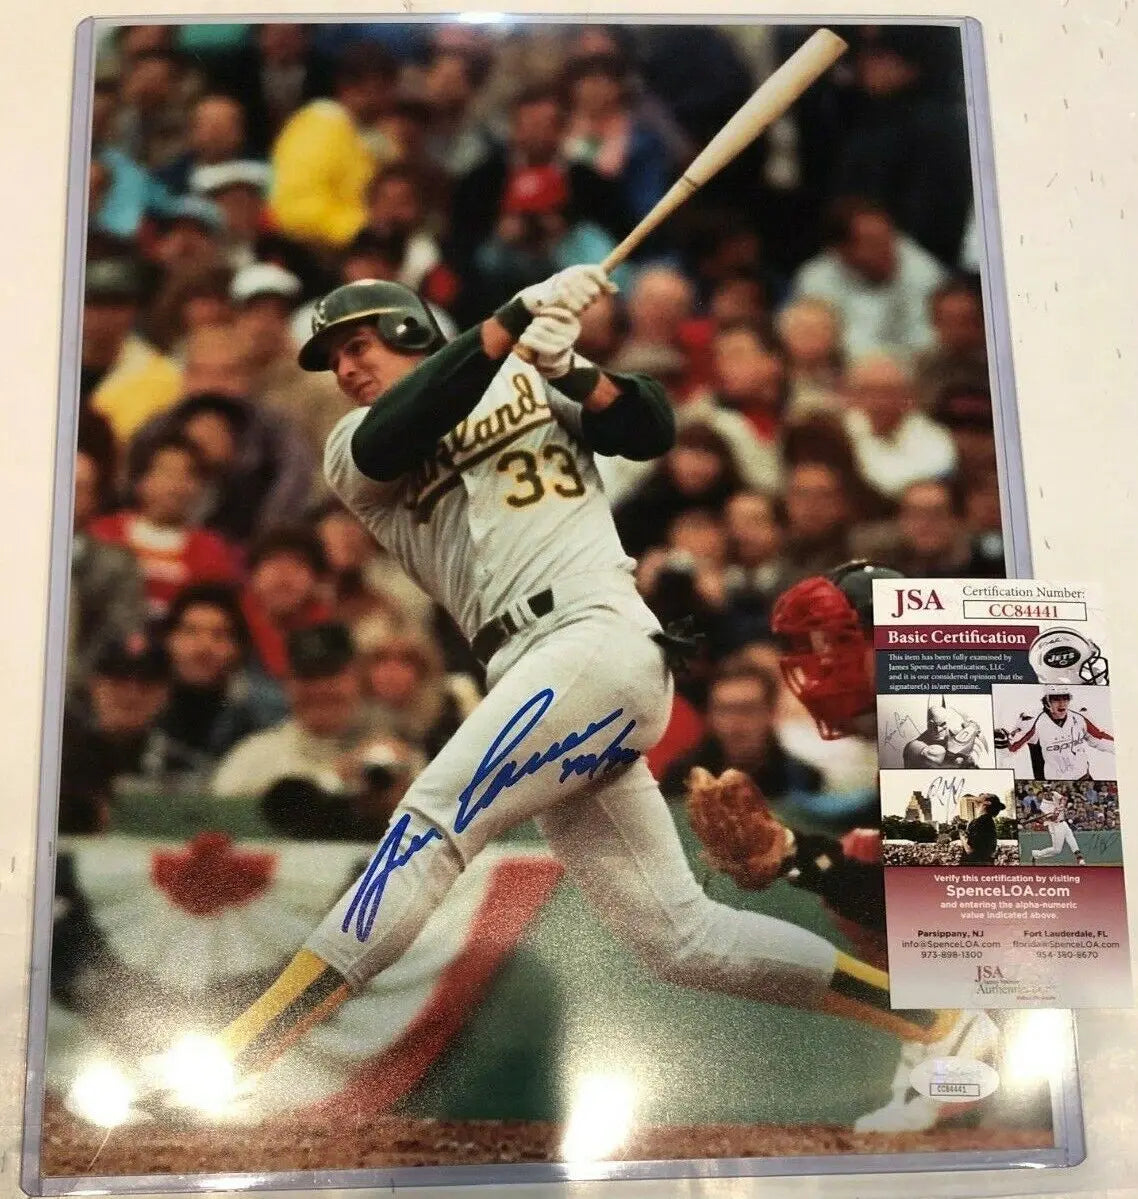 MVP Authentics Oakland A's Jose Canseco Autographed Signed Inscribed 11X14 Photo Jsa  Coa 45 sports jersey framing , jersey framing